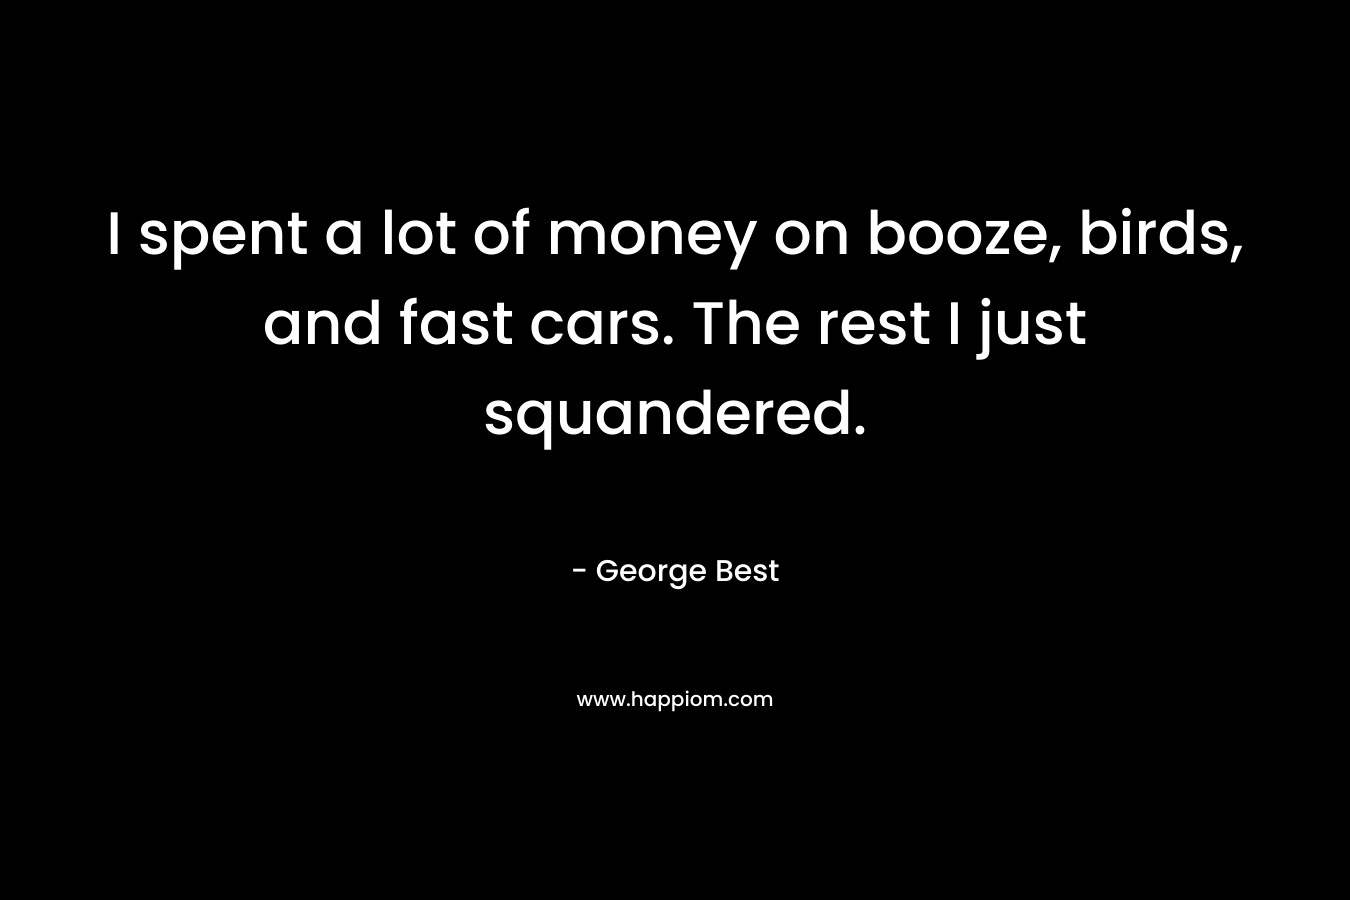 I spent a lot of money on booze, birds, and fast cars. The rest I just squandered. – George Best